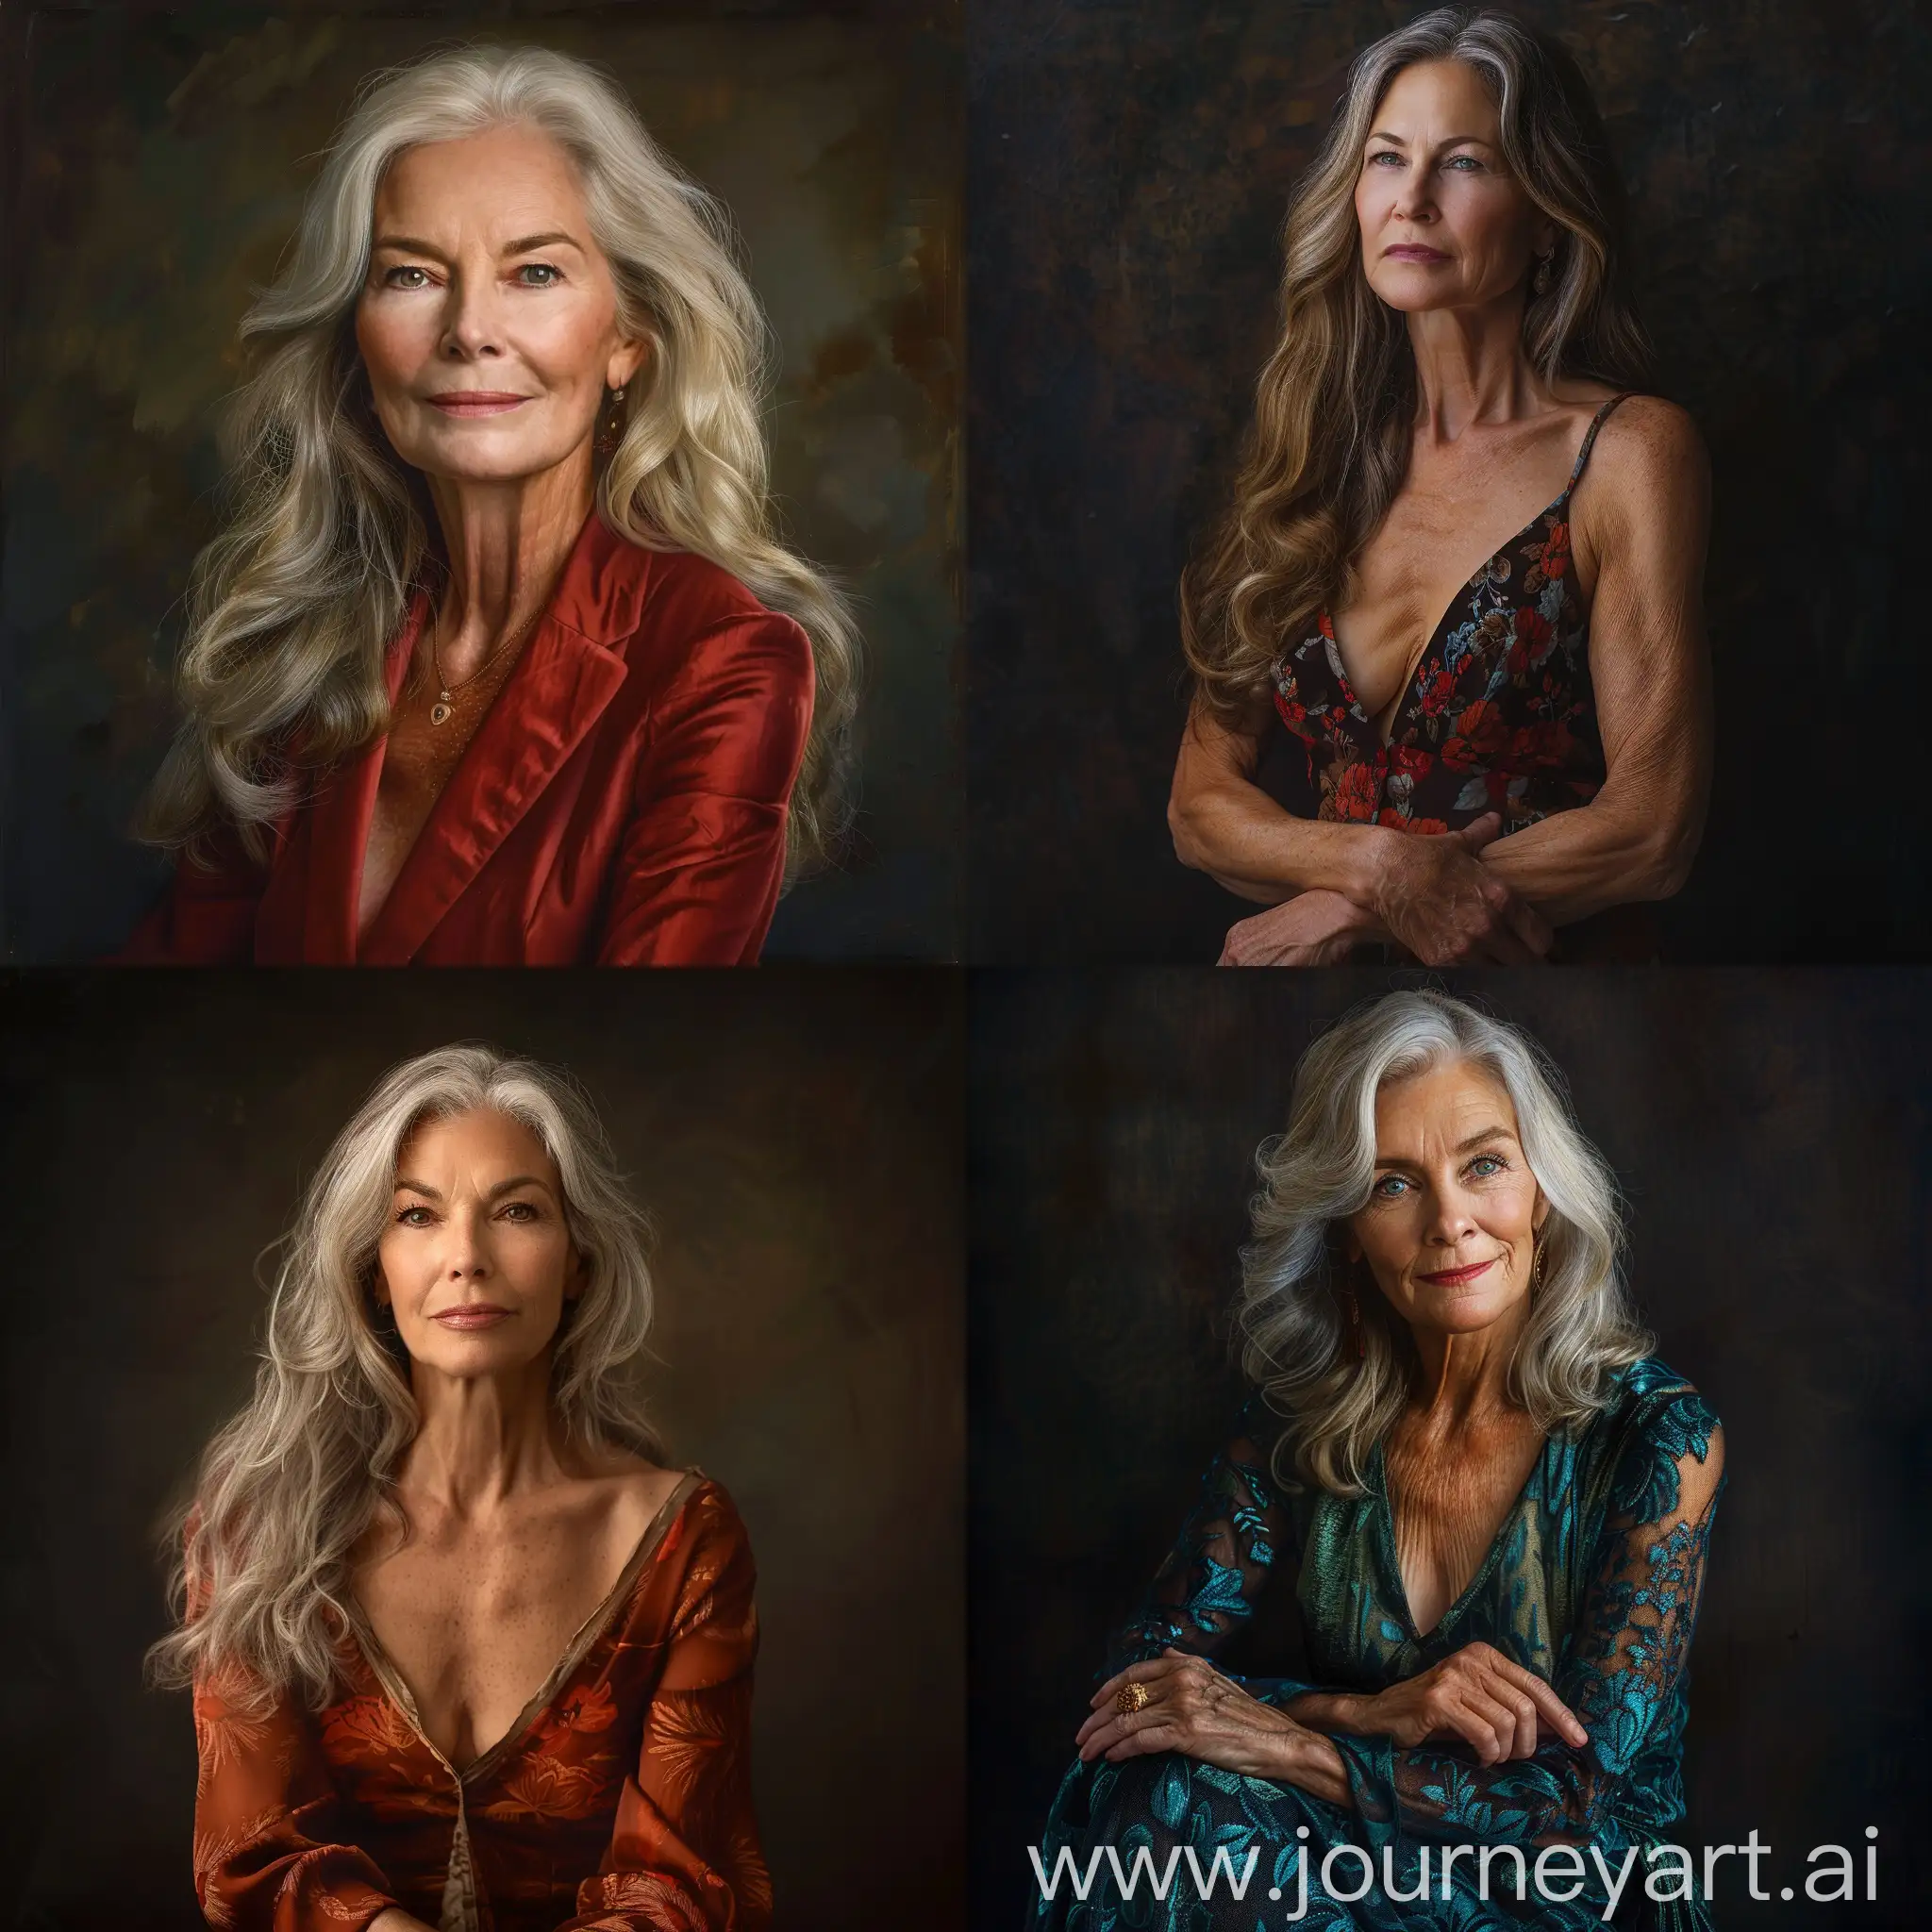 Realistic portrait of a confident and seductive woman in her 50s, inspired by the works of John Singer Sargent and Jan van Eyck, soft lighting to enhance her features, intricate details such as wrinkles and fine lines, oil painting style with vibrant colors, long shot to capture her entire figure.